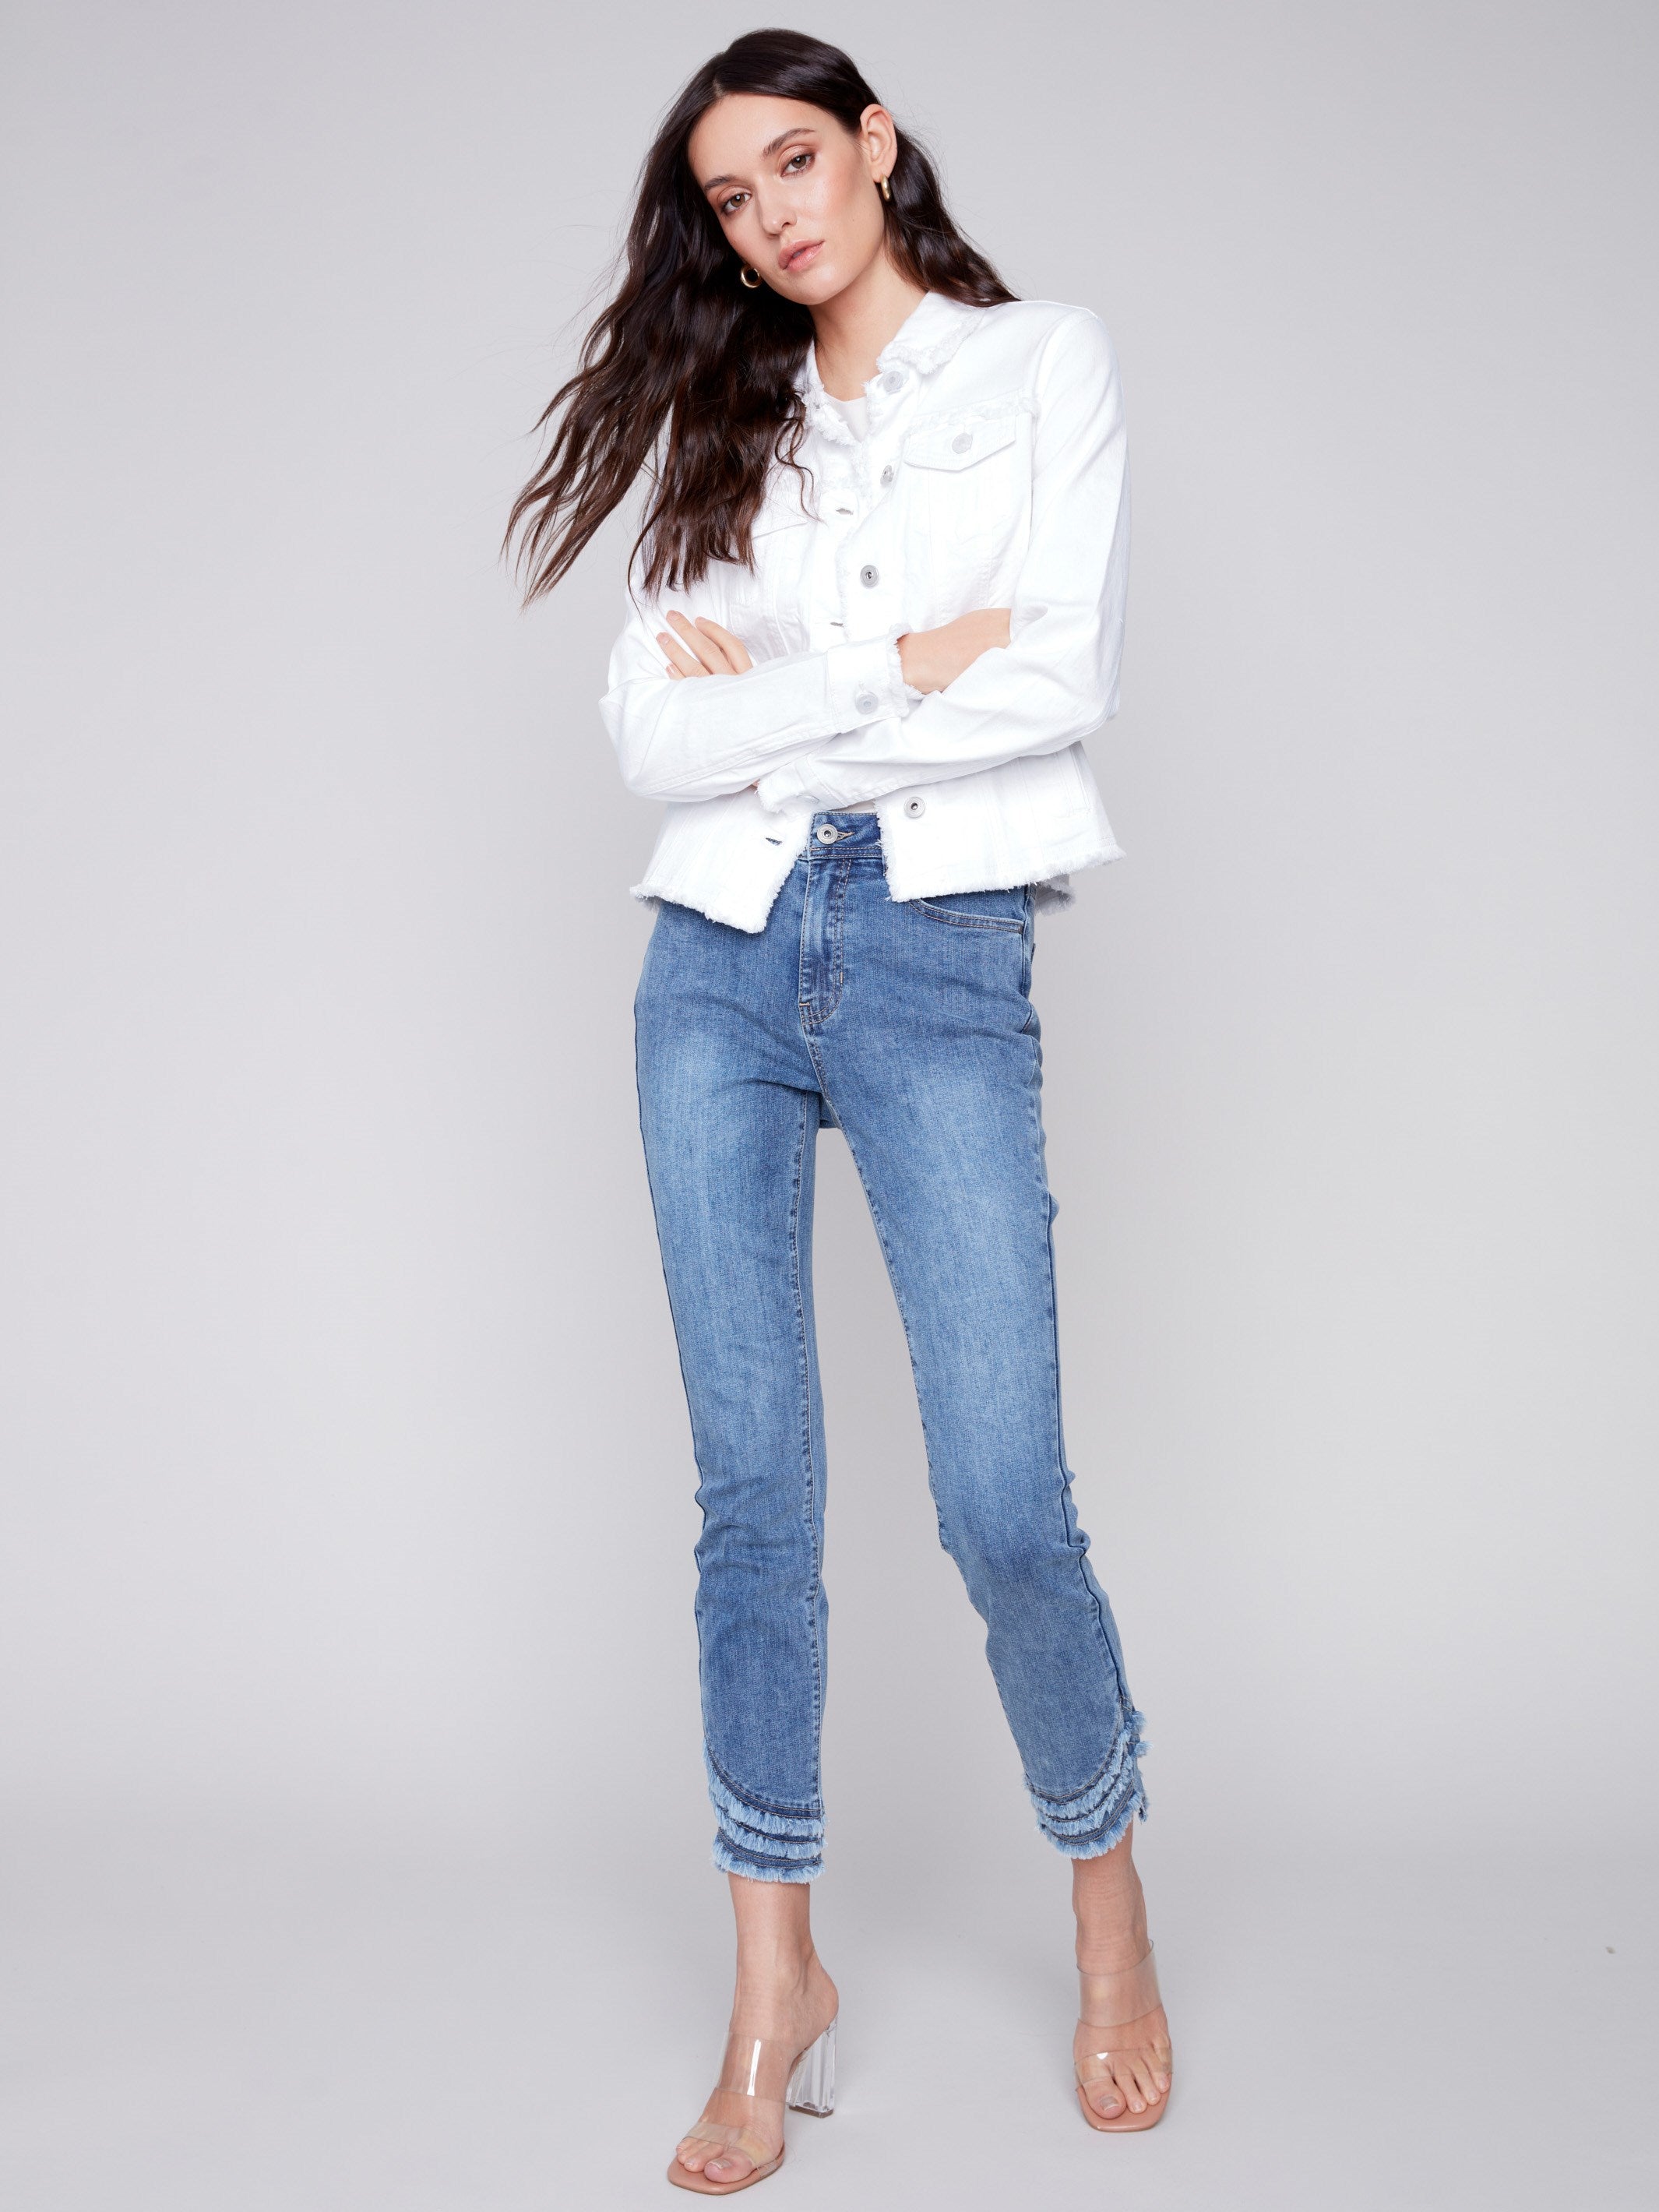 Charlie B Twill Jean Jacket with Frayed Edges - White - Image 2